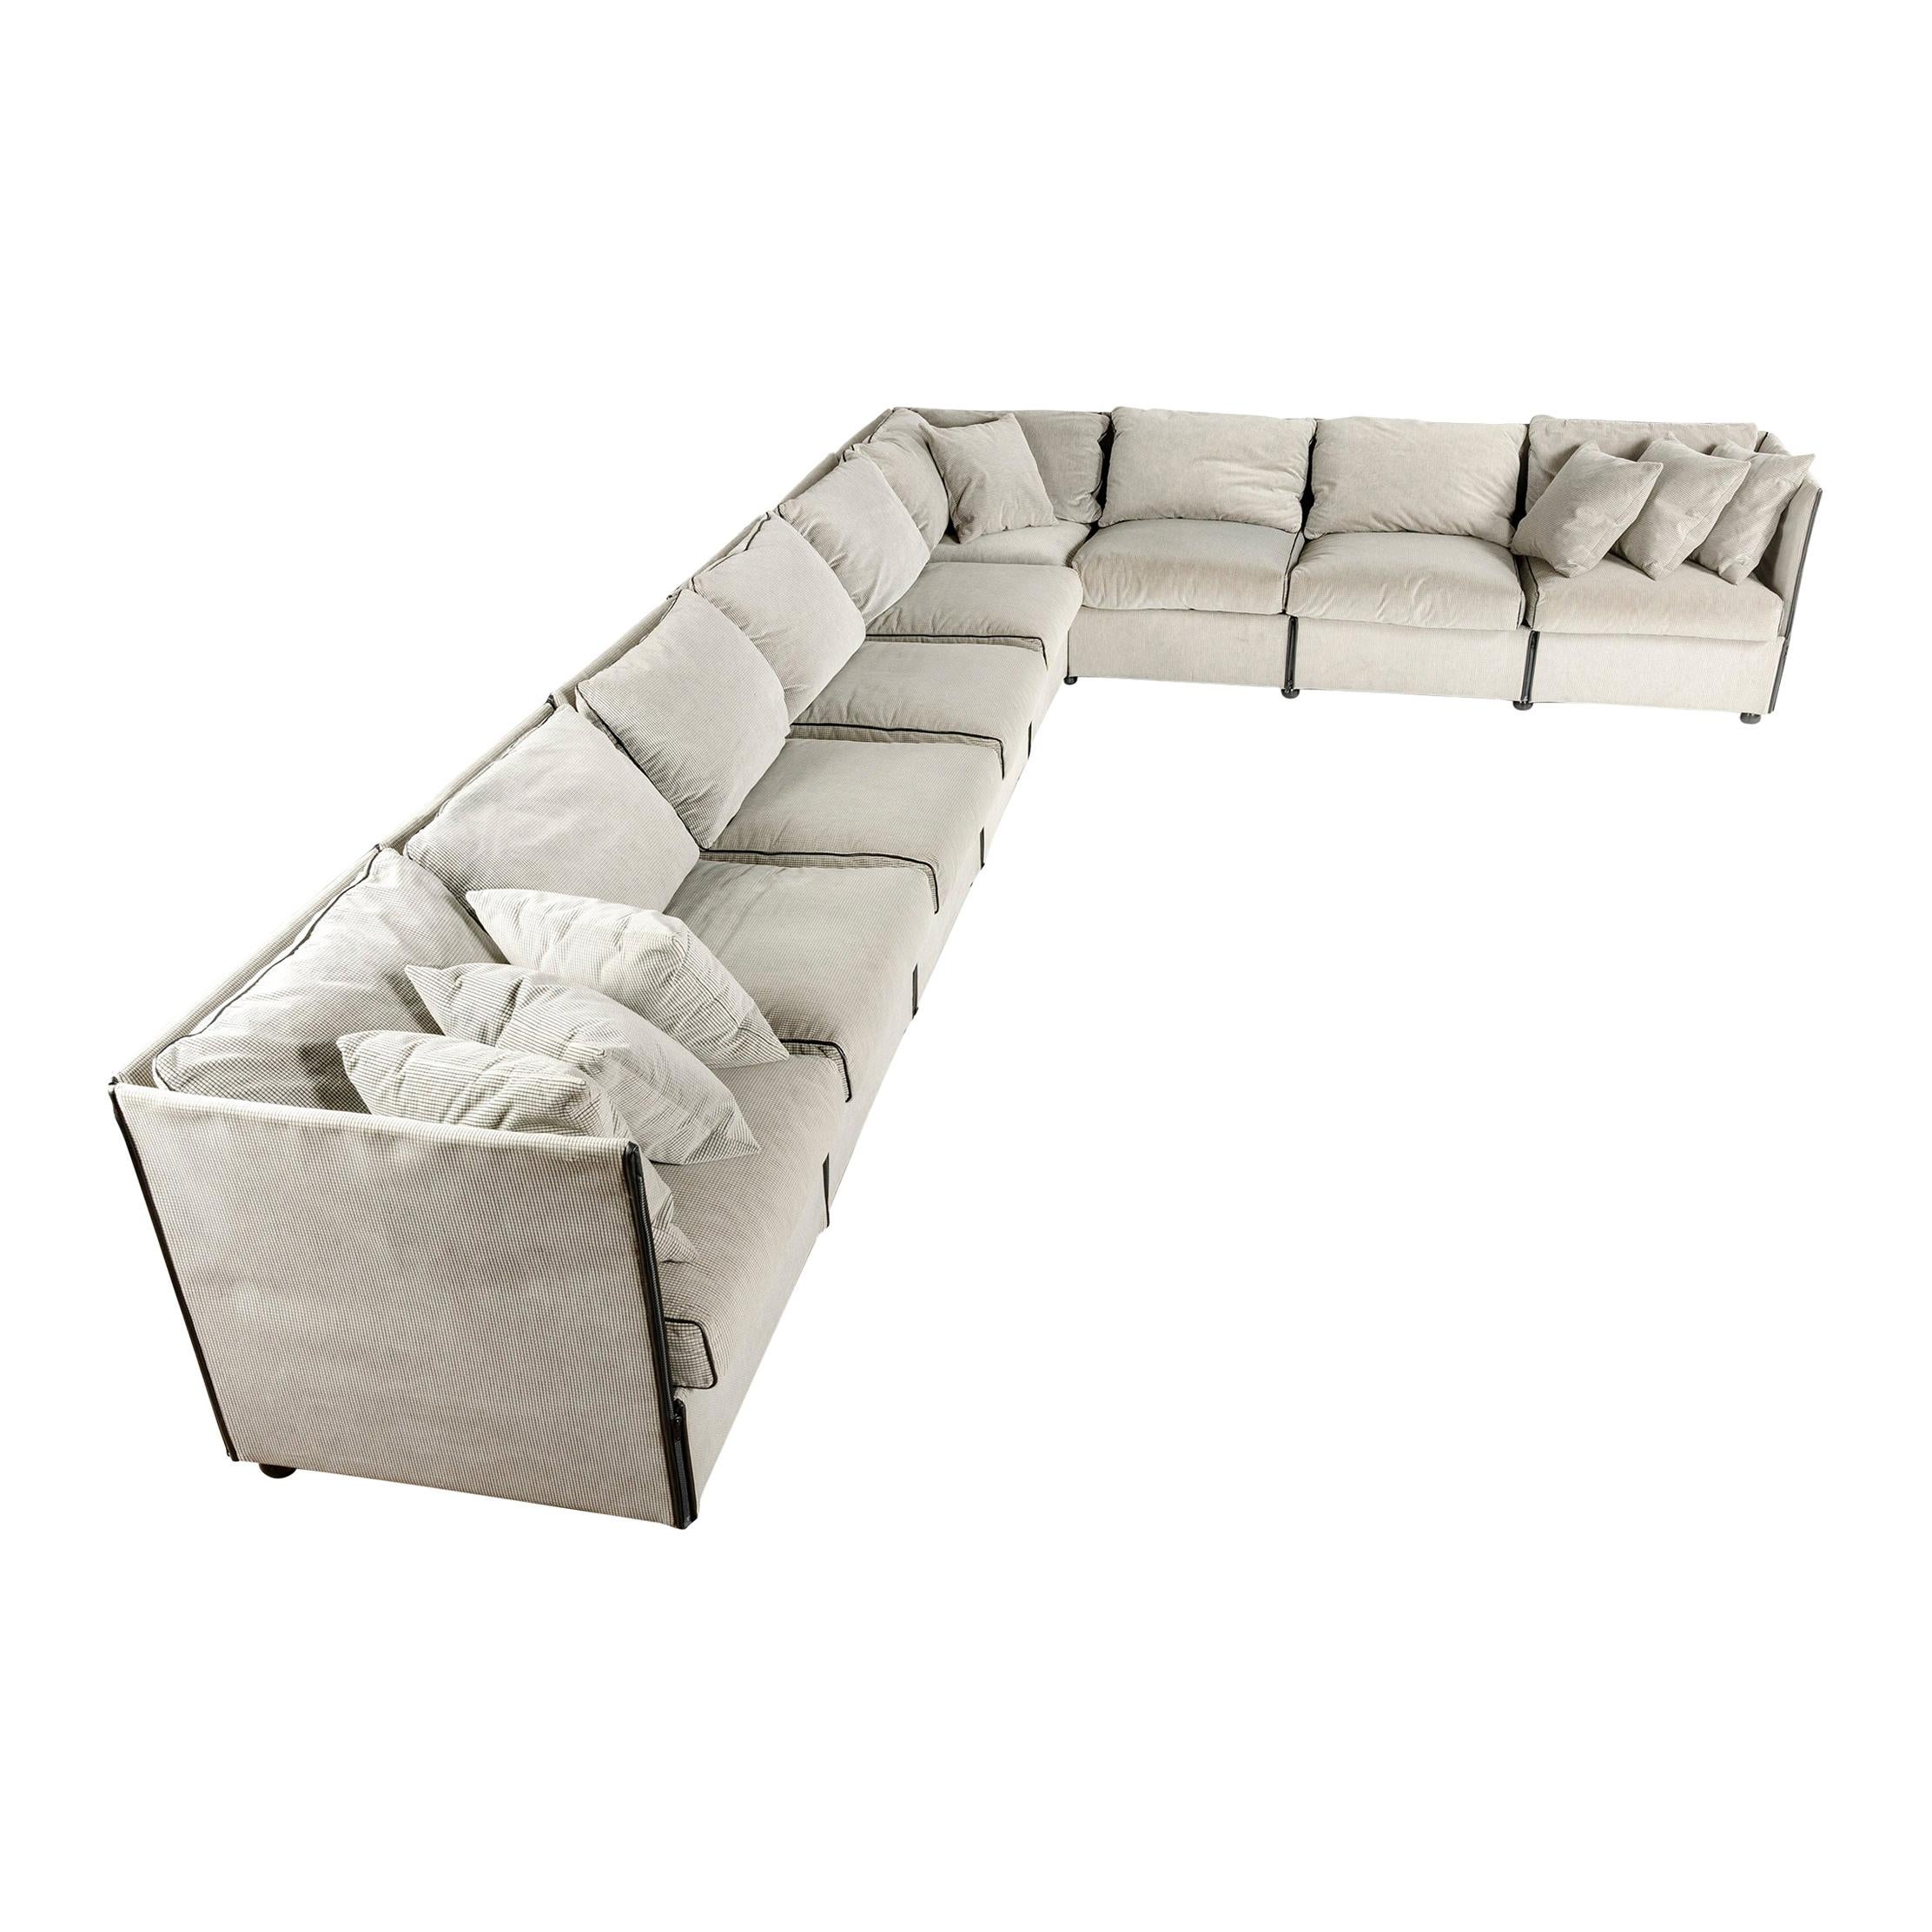 Grey 'Char-a-Banc' Modular Sectional Sofa by Mario Bellini for Cassina